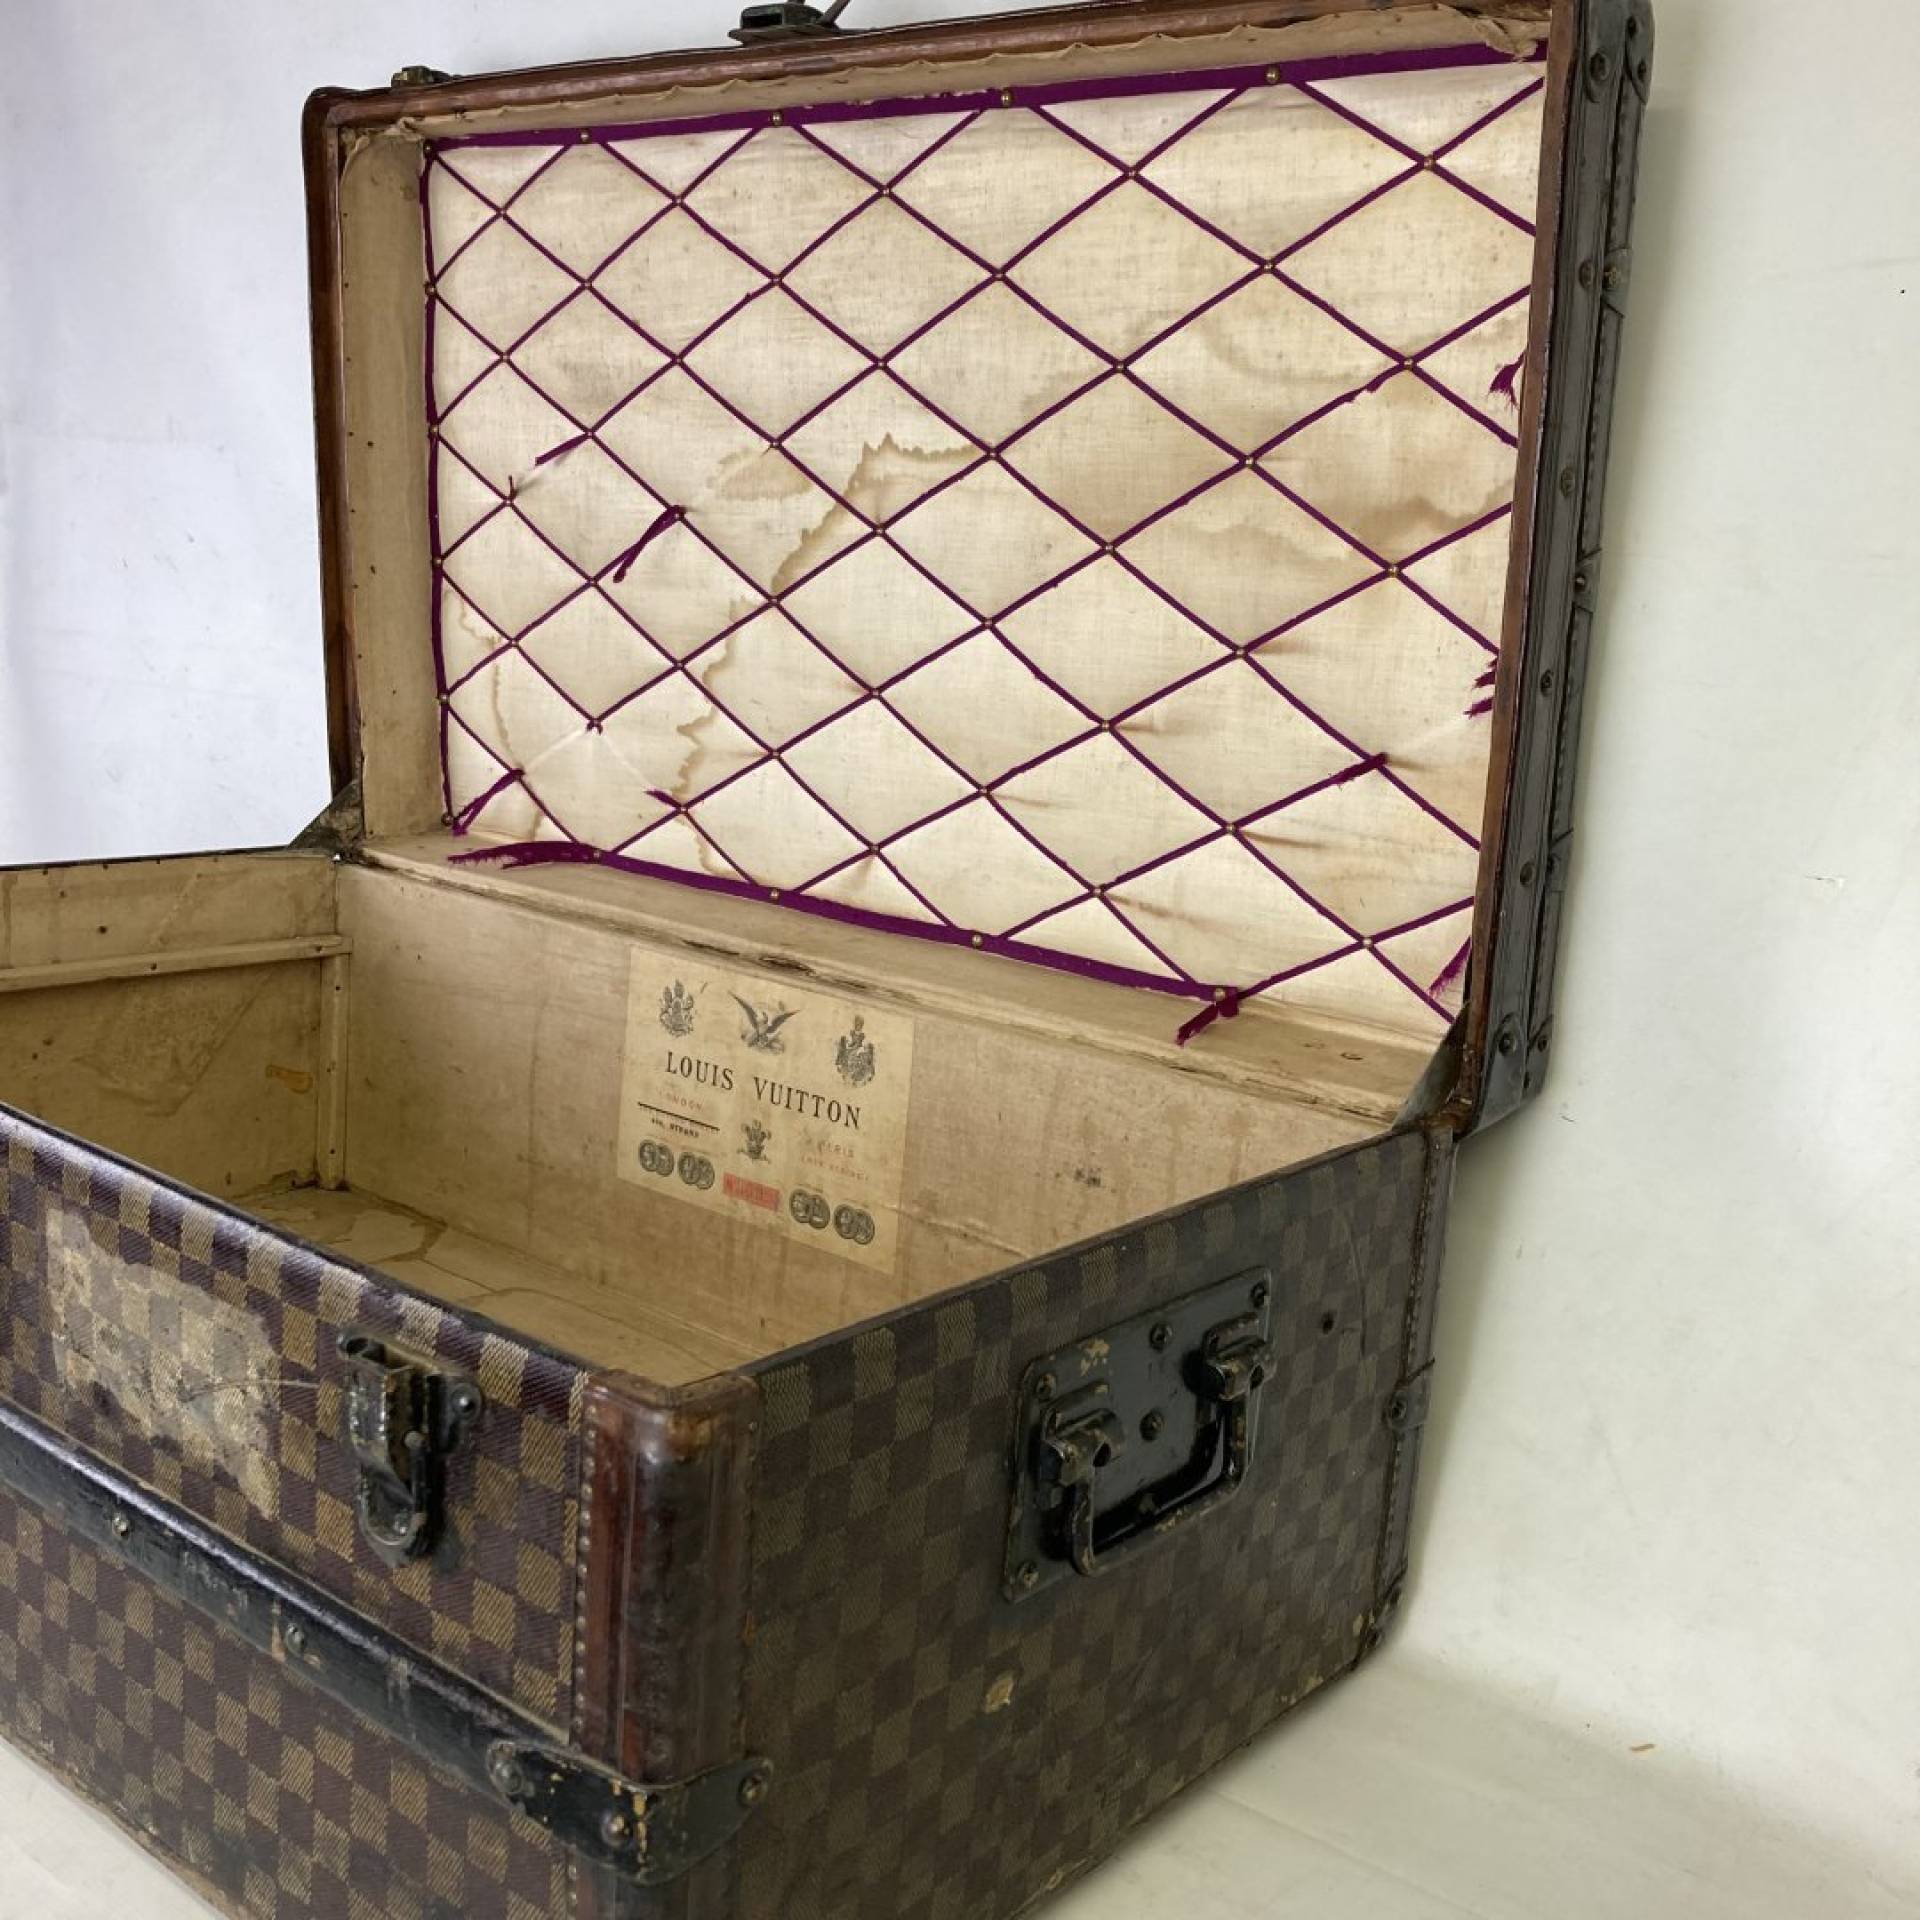 Vintage Louis Vuitton trunk sold at auction on 7th December